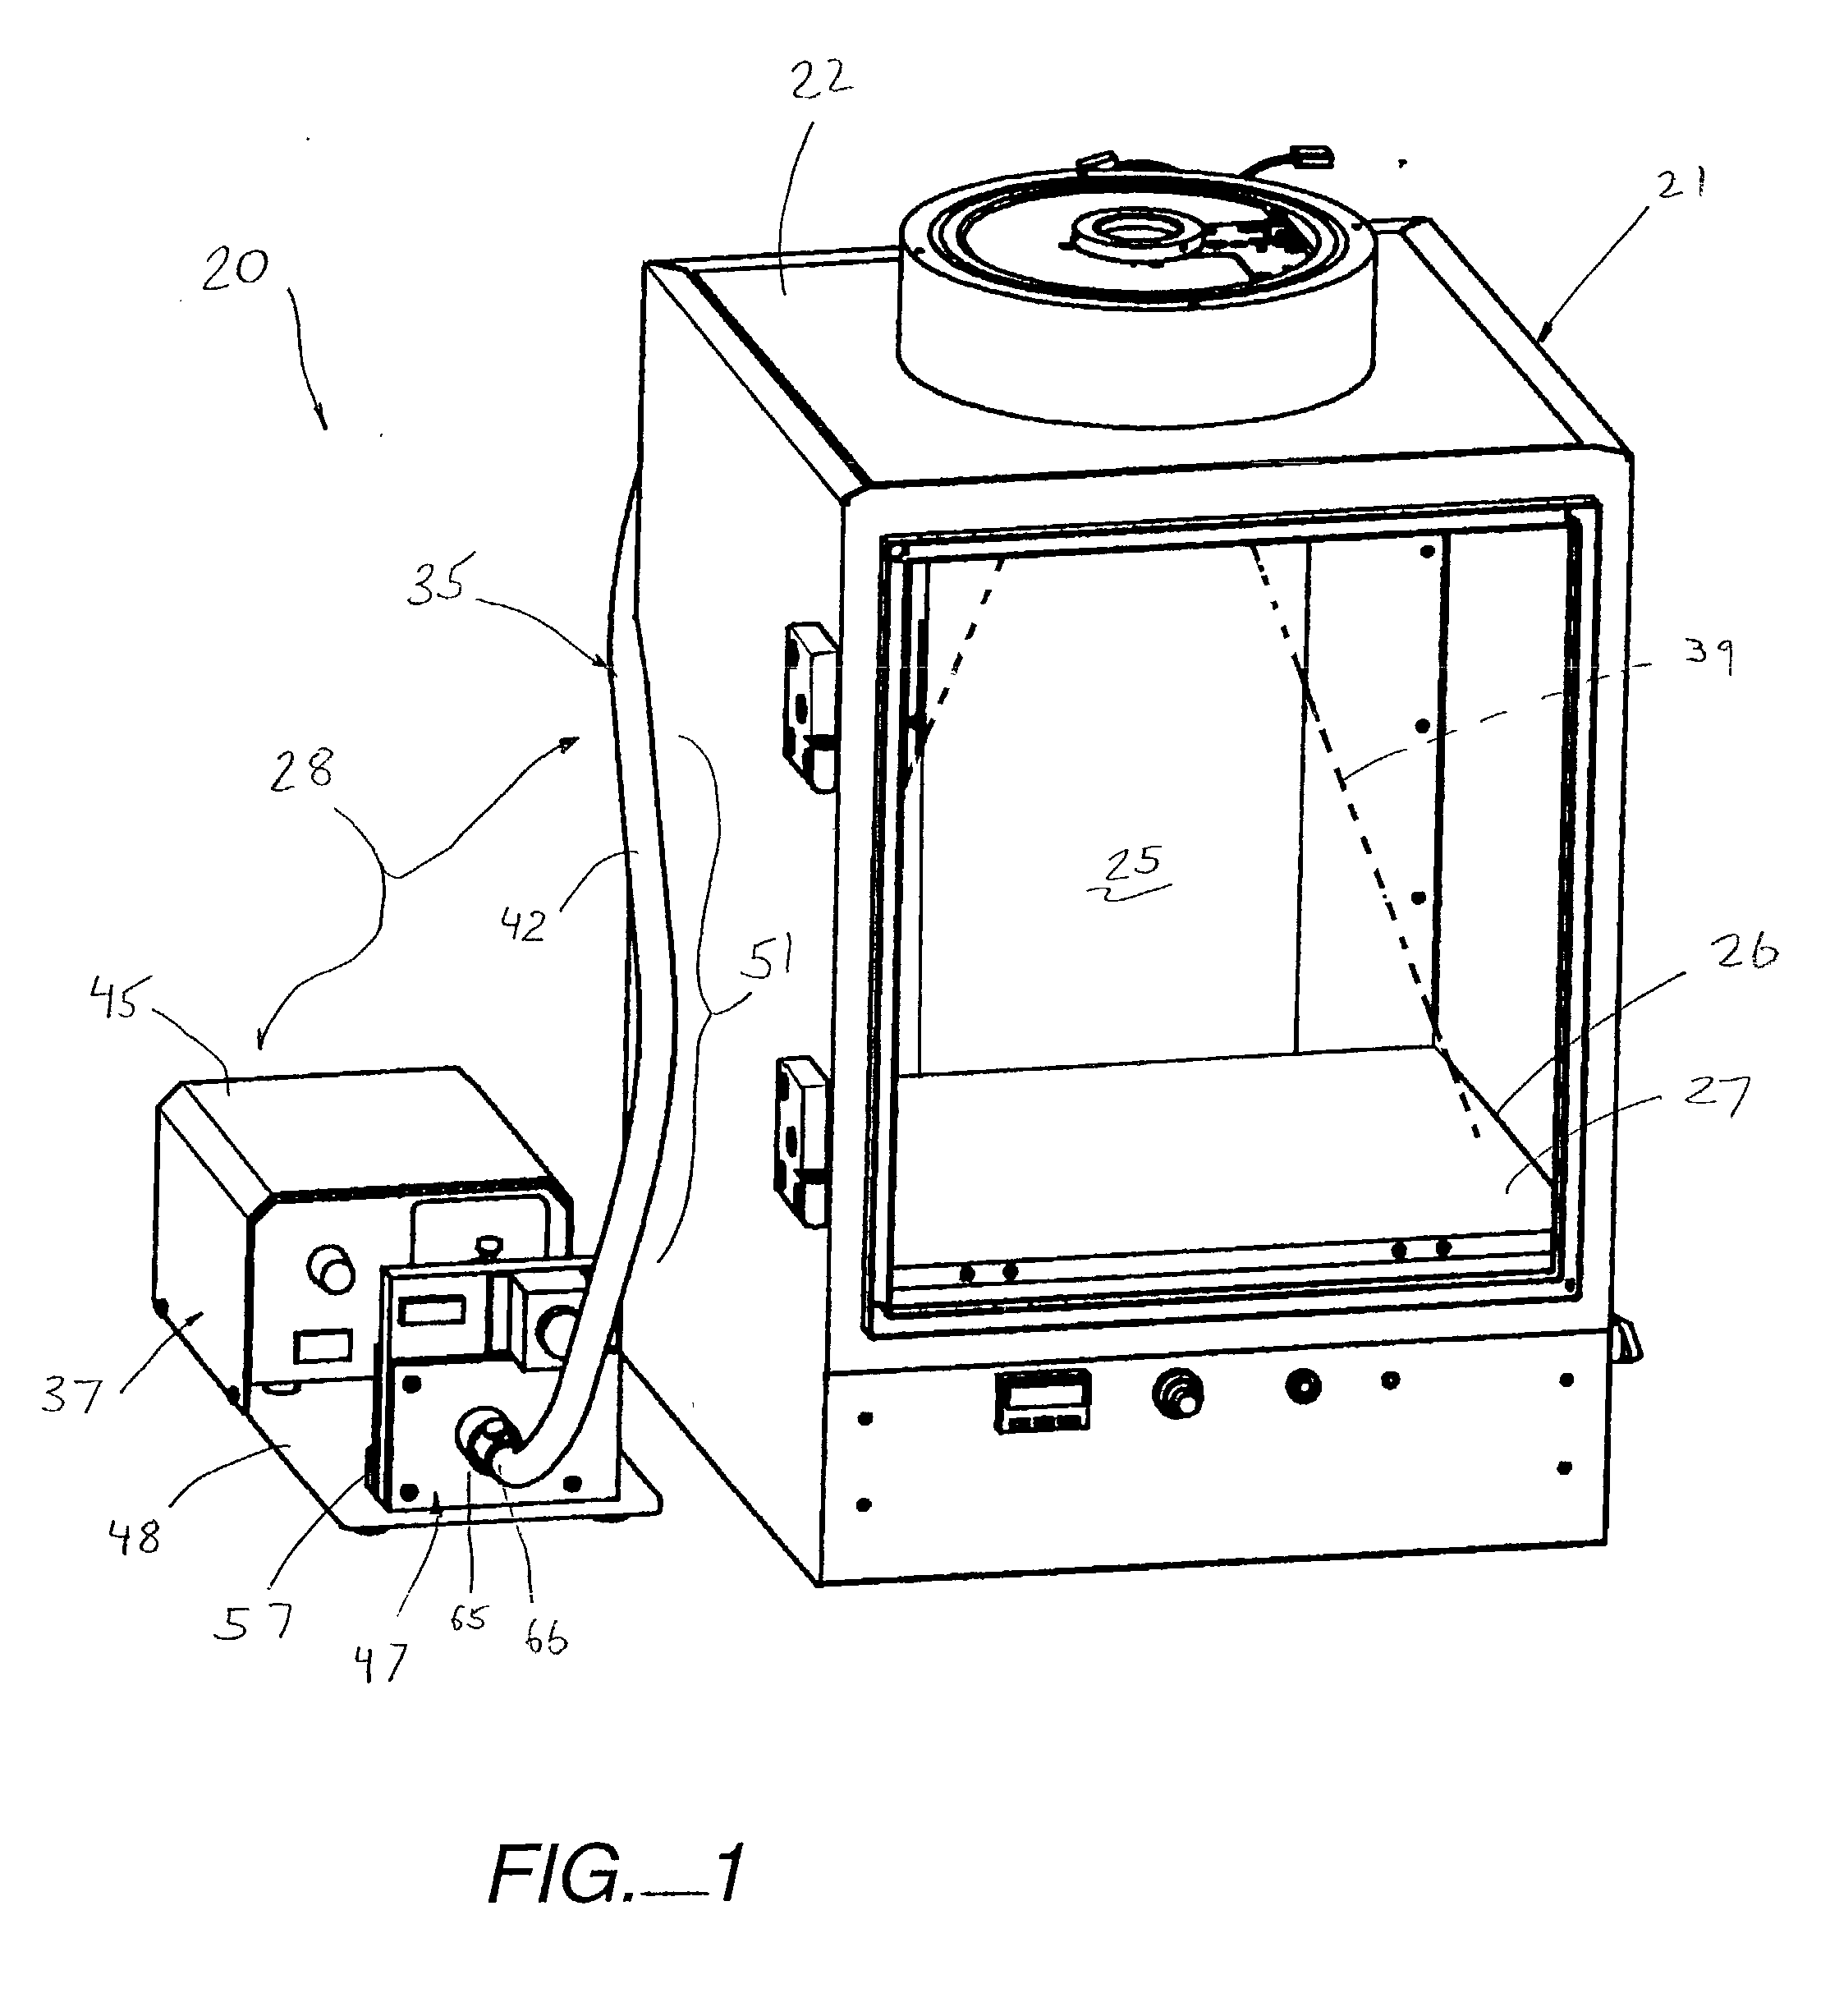 Fluorescence illumination assembly for an imaging apparatus